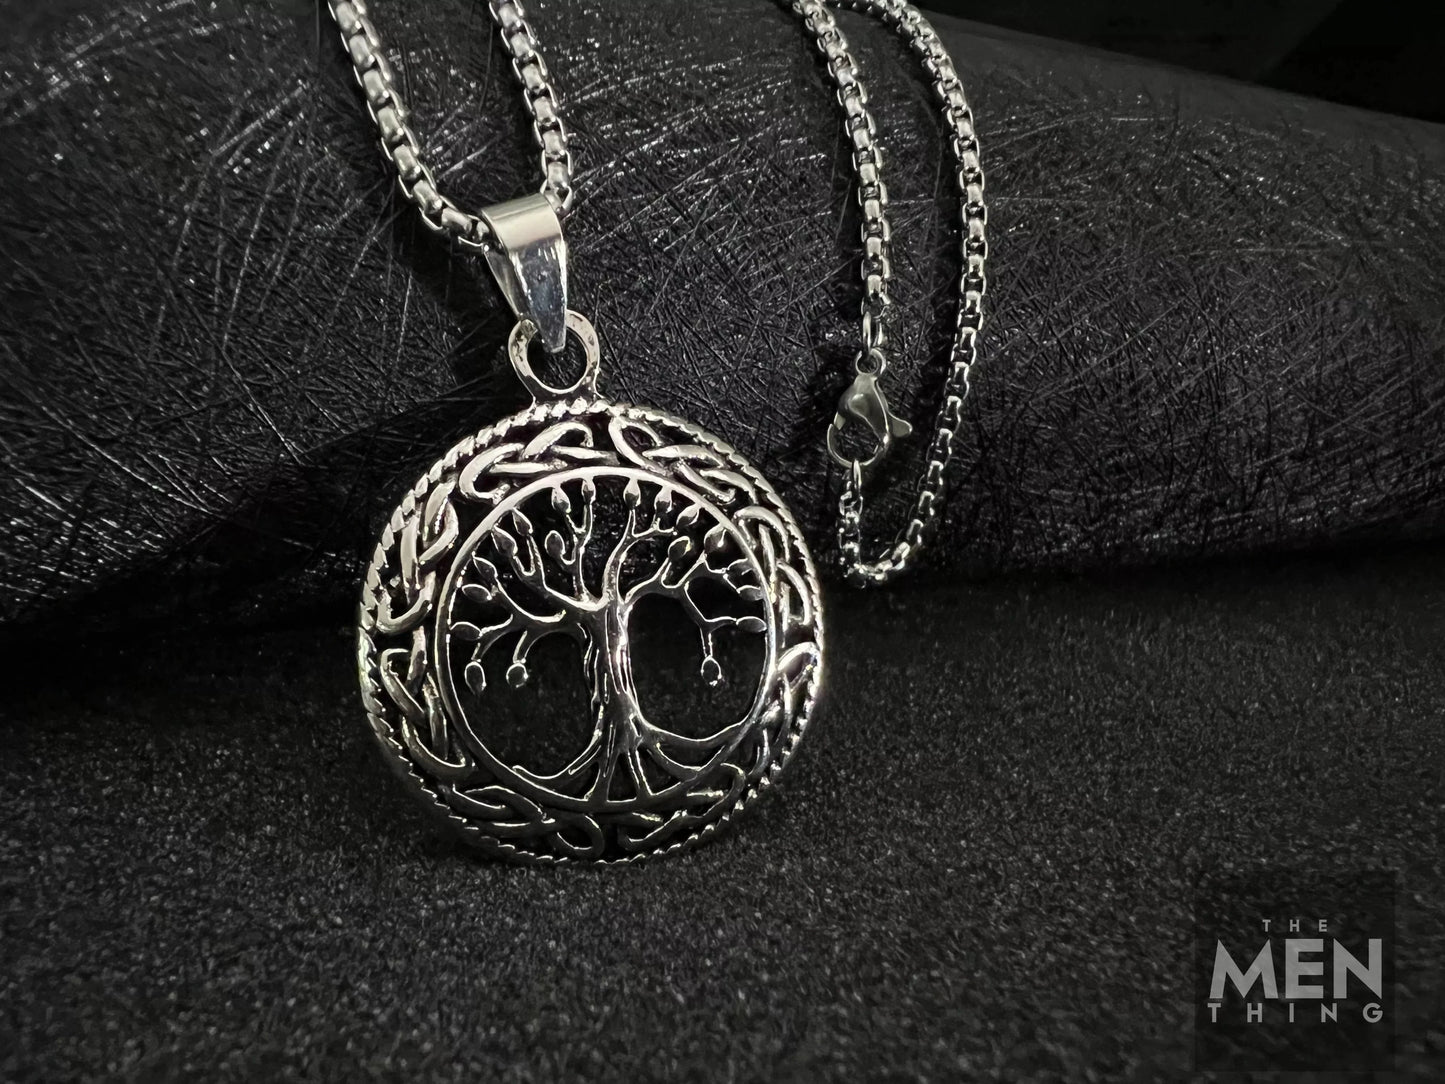 THE MEN THING Alloy Tree Of Life Pendant with Pure Stainless Steel 24inch Chain for Men, American trending Style - Round Box Chain & Pendant for Men & Boy